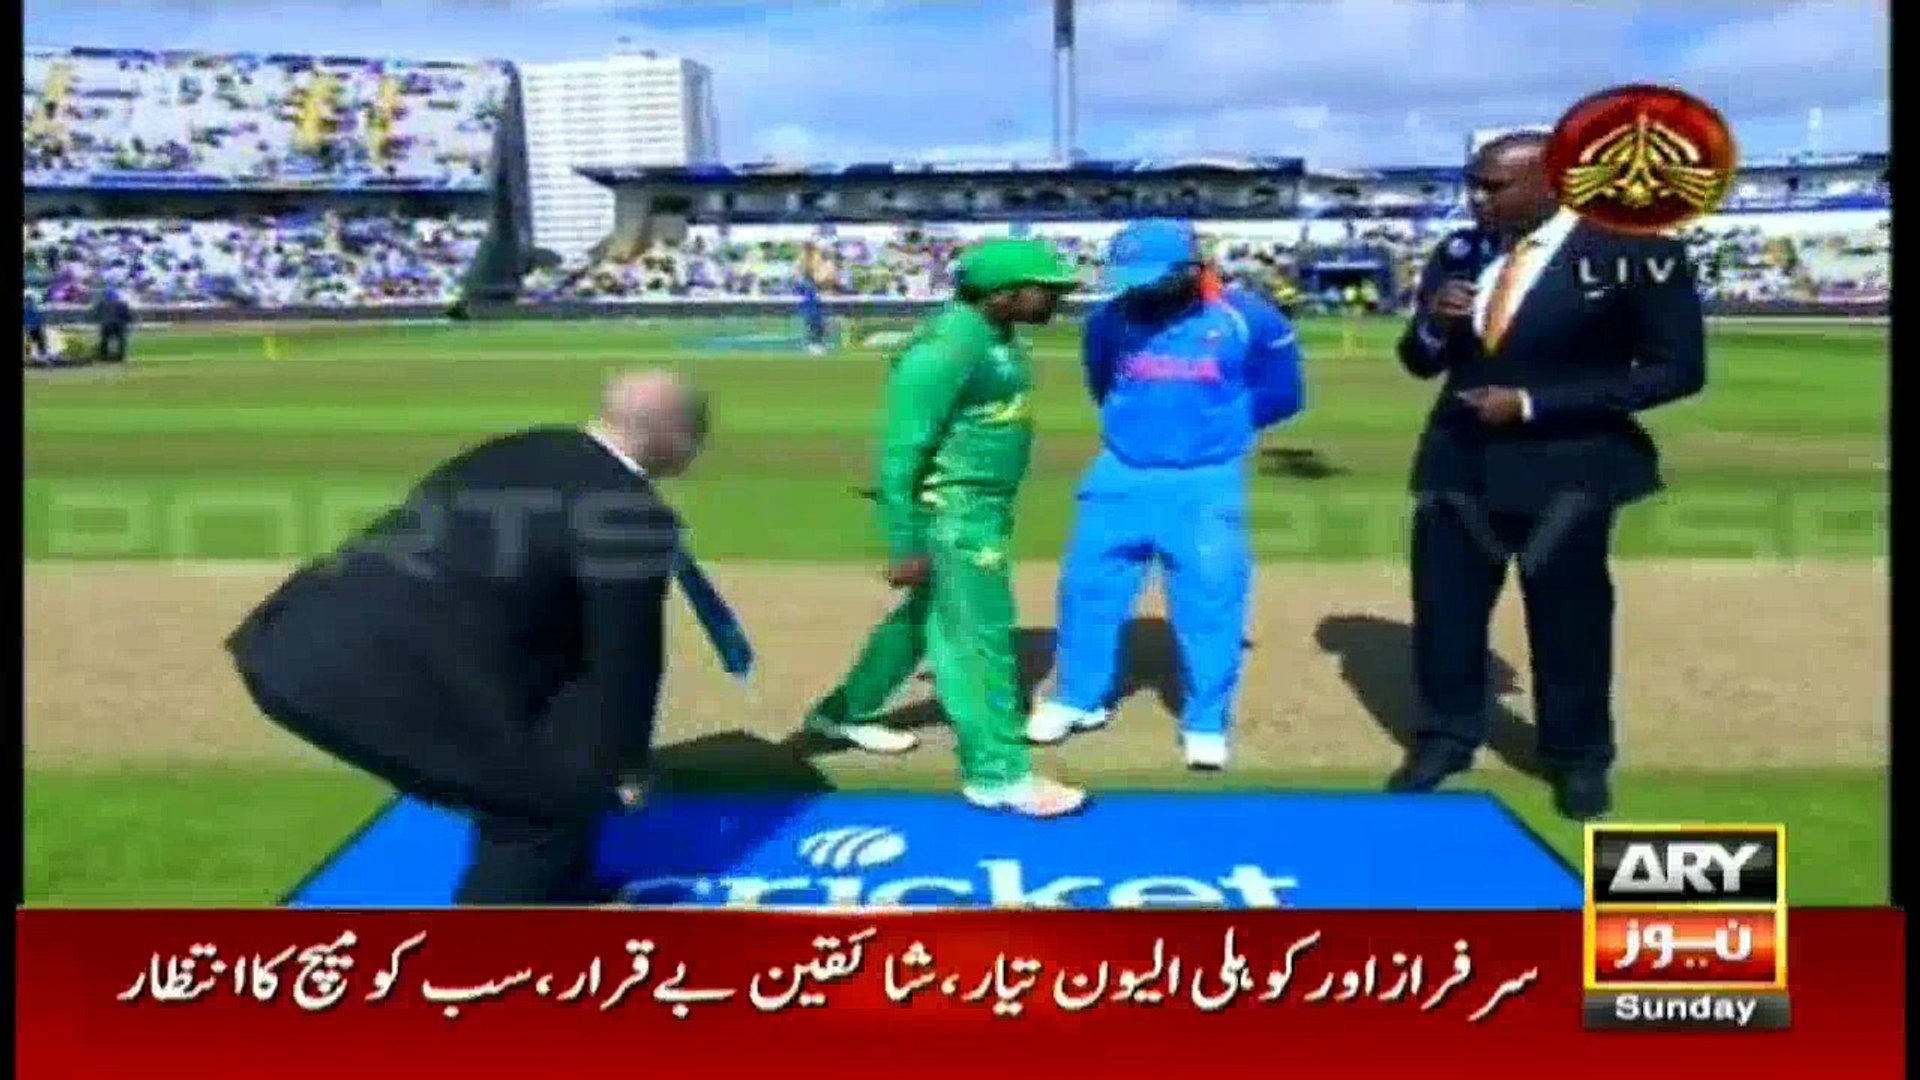 PAK vs IND ICC Champions Trophy: Captain of both teams share their views